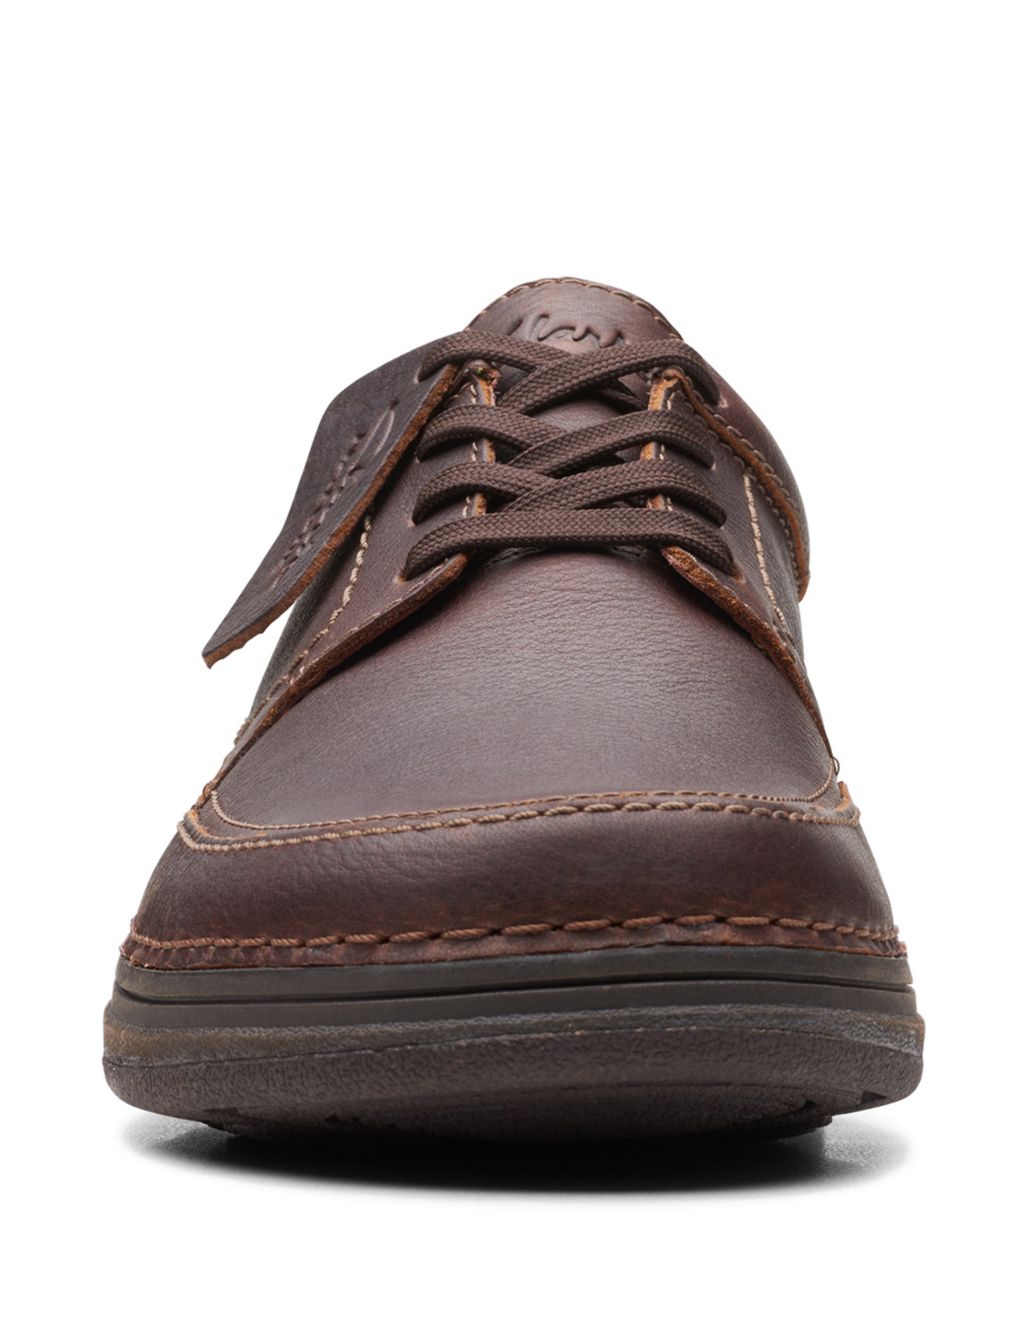 Wide Fit Leather Casual Shoes image 3